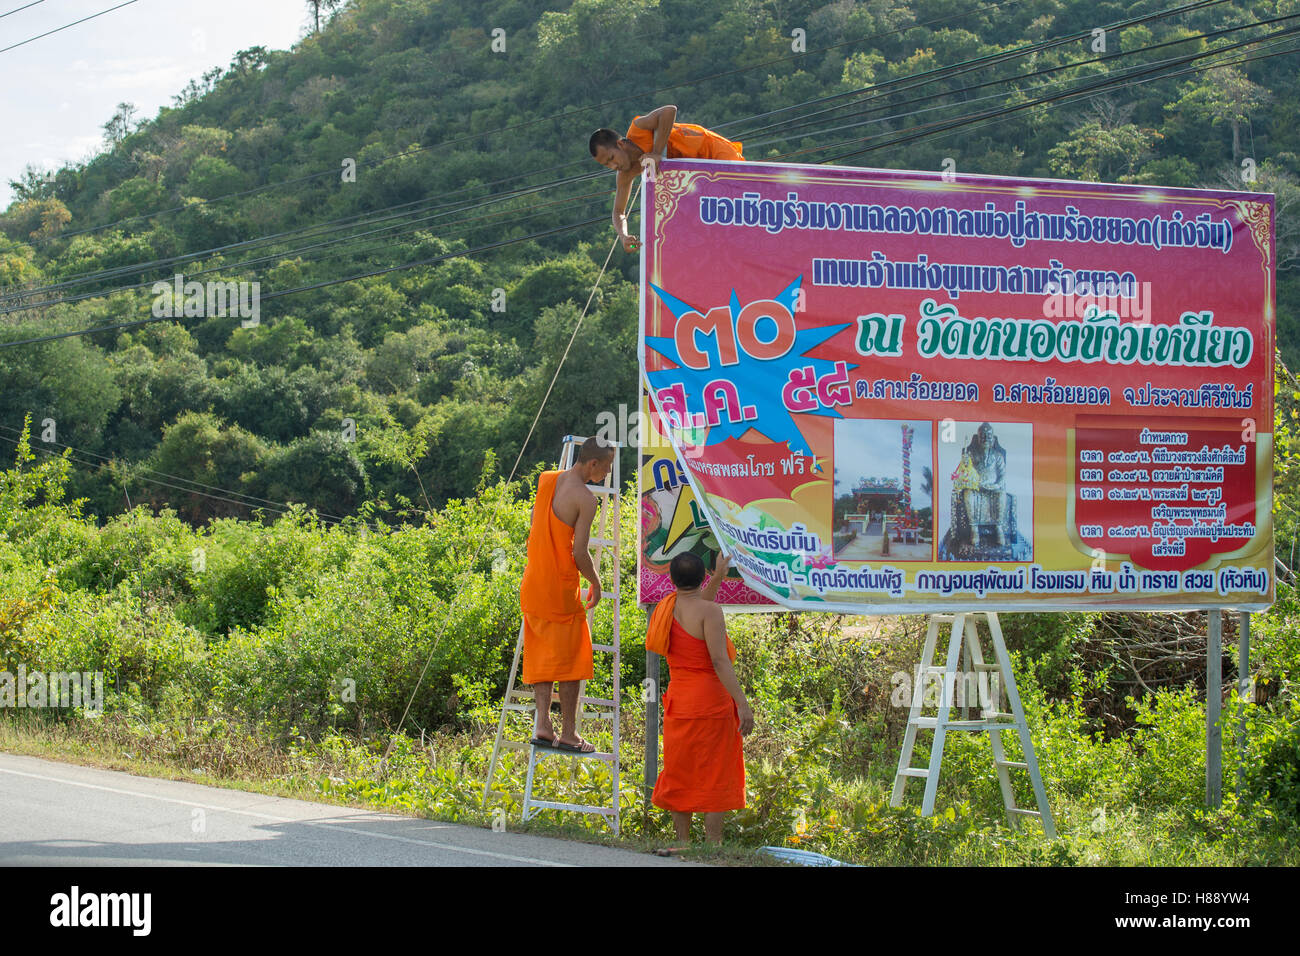 Buddhist monks putting up a sign south of Hua Hin, Thailand Stock Photo